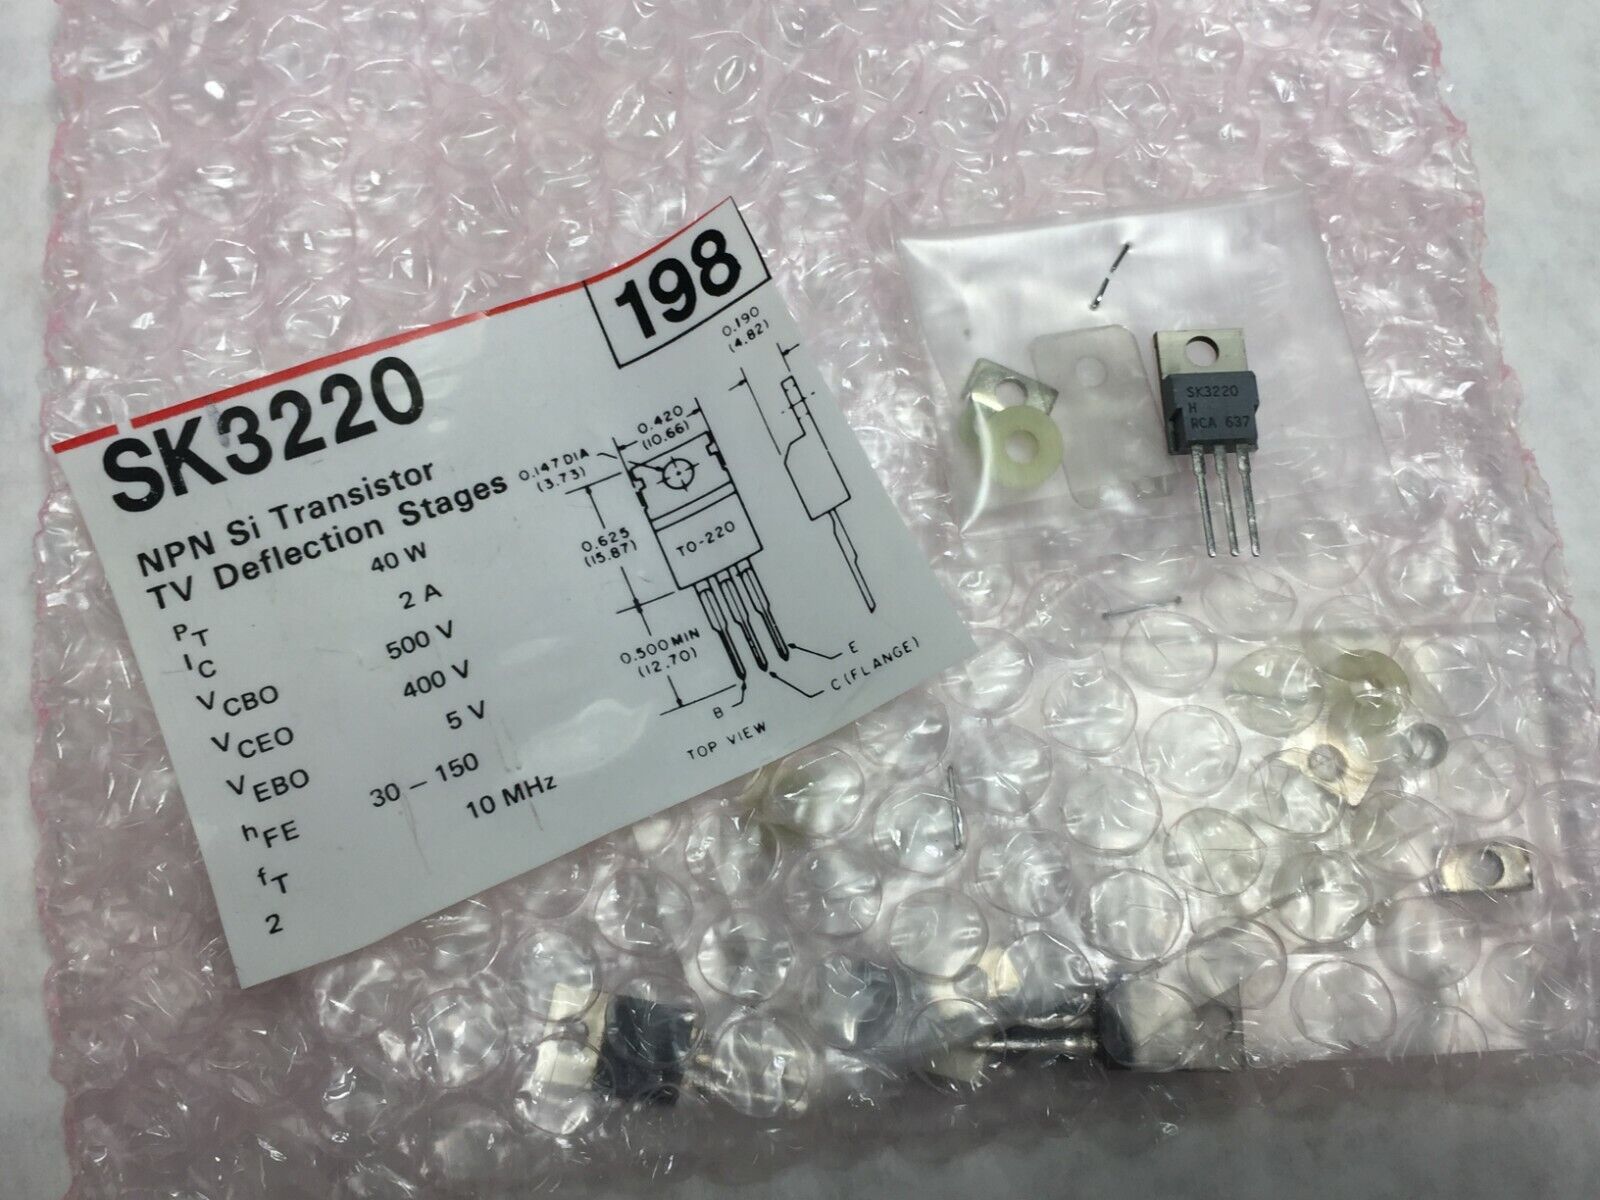 NOS  RCA SK3220 NPN Si Transistor TV Deflection Stages    Lot of 5